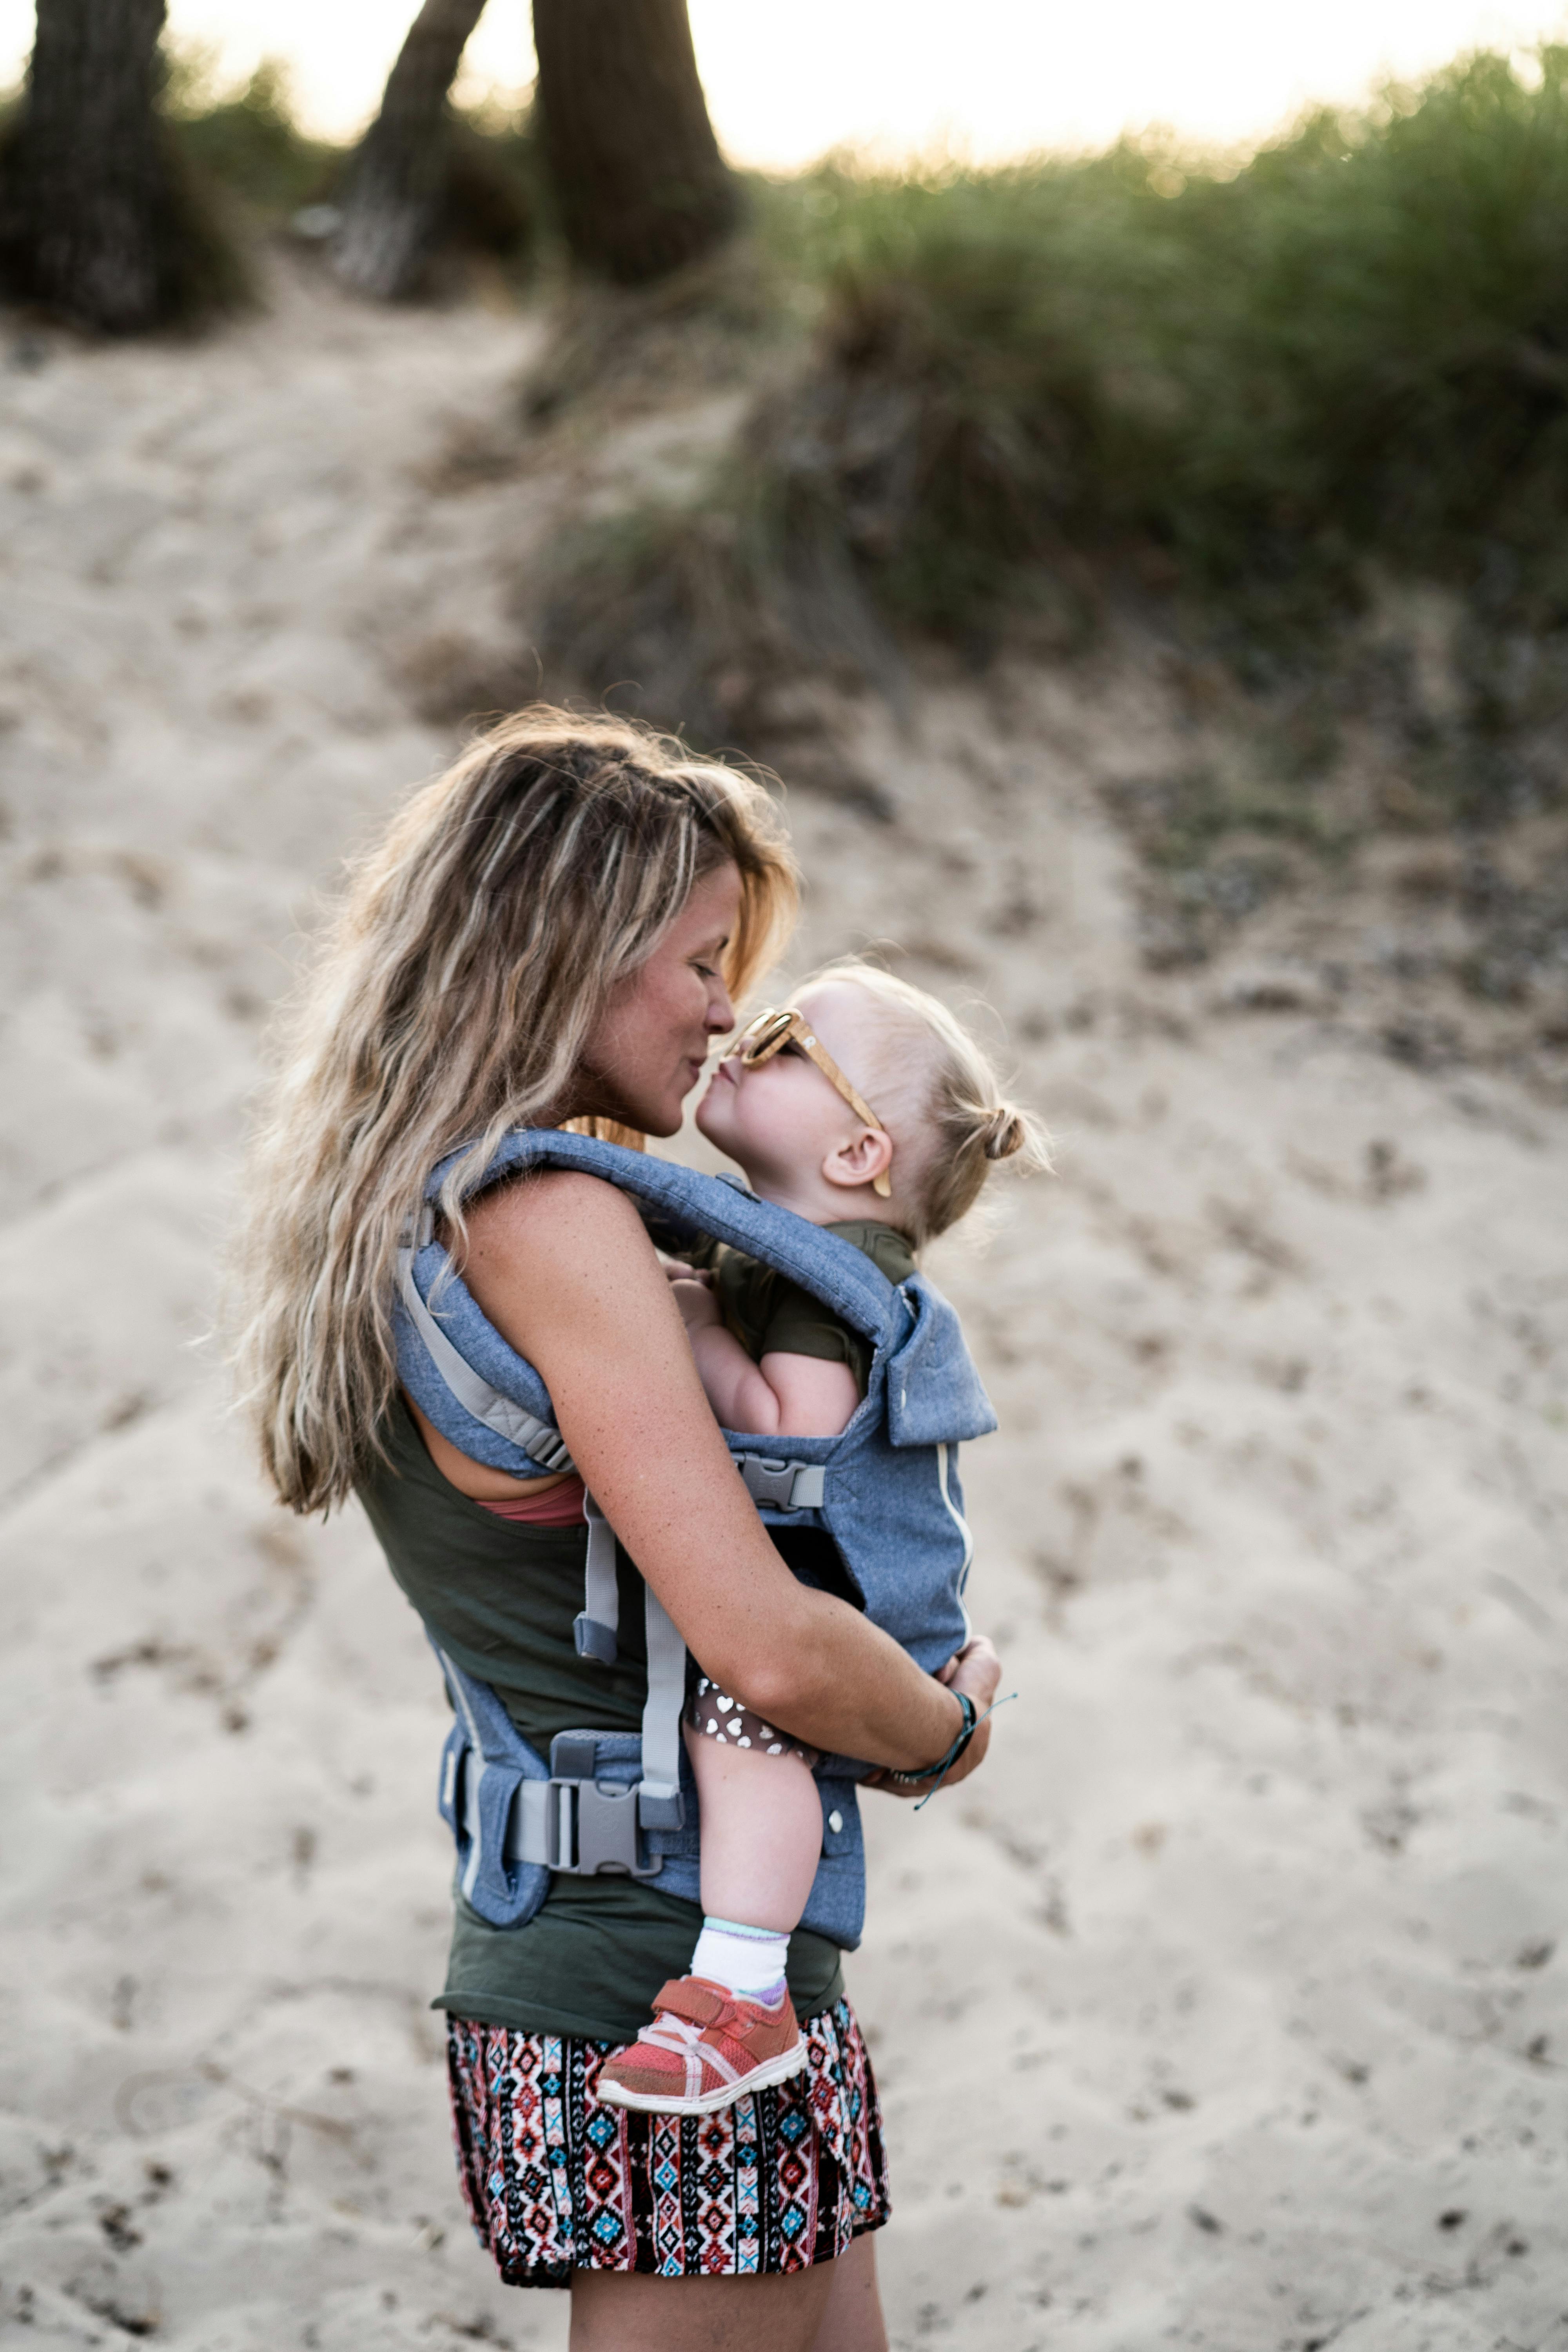 Woman carrying a little girl. | Photo: Pexels